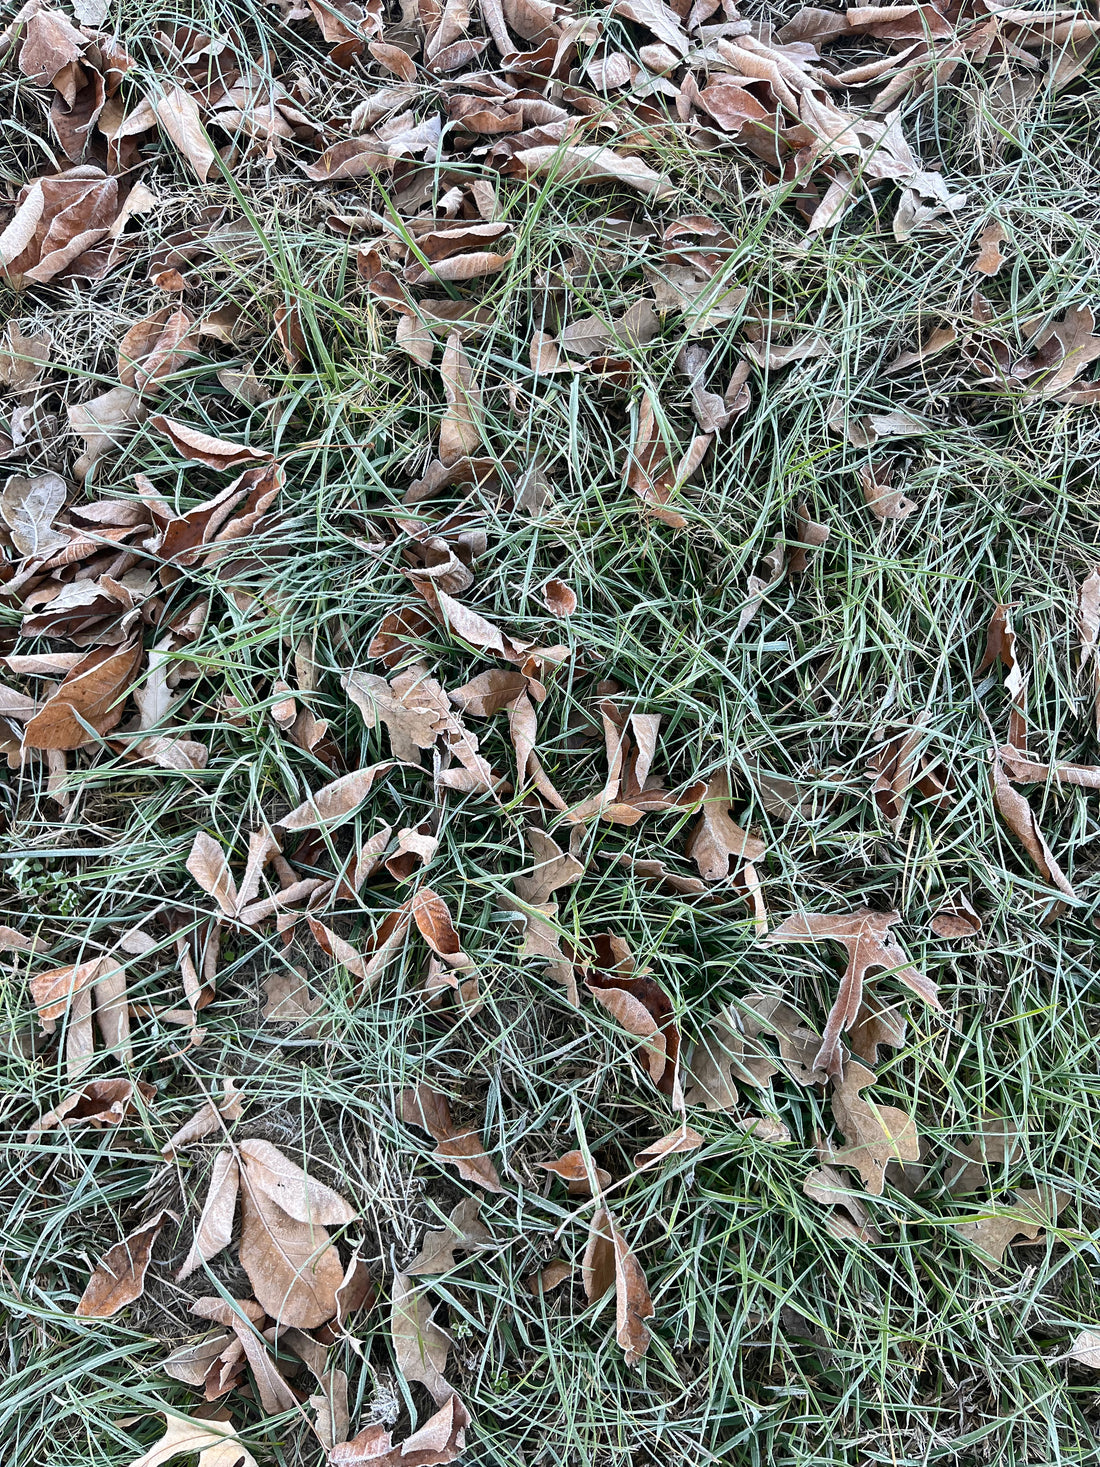 First Frost and we felt it…